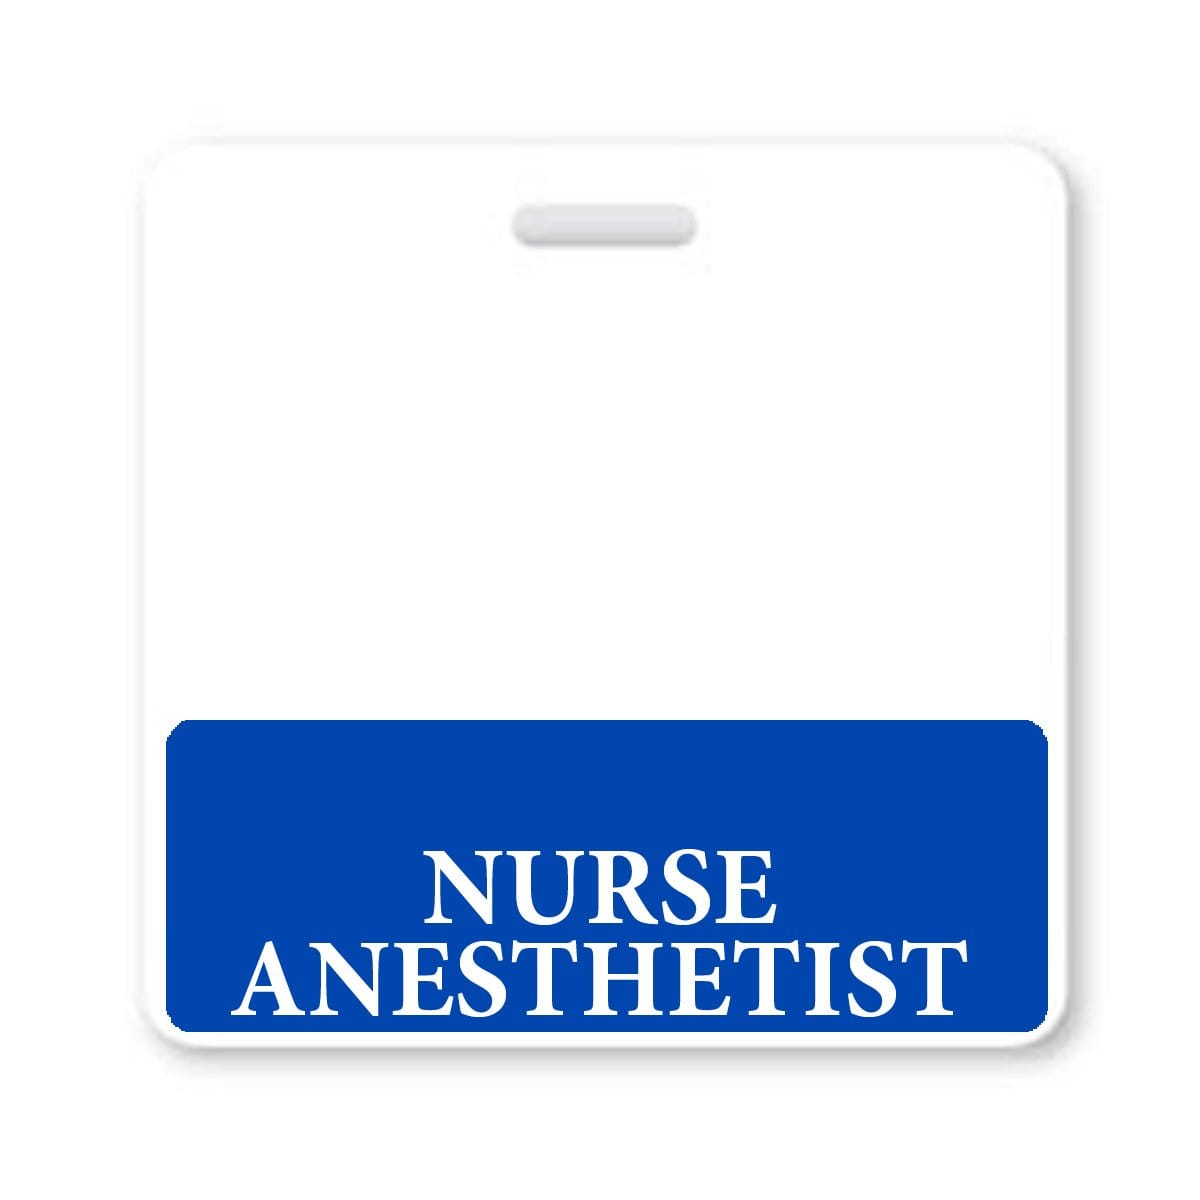 A Nurse Anesthetist Horizontal Badge Buddy with Blue Border, perfect for a hospital setting.